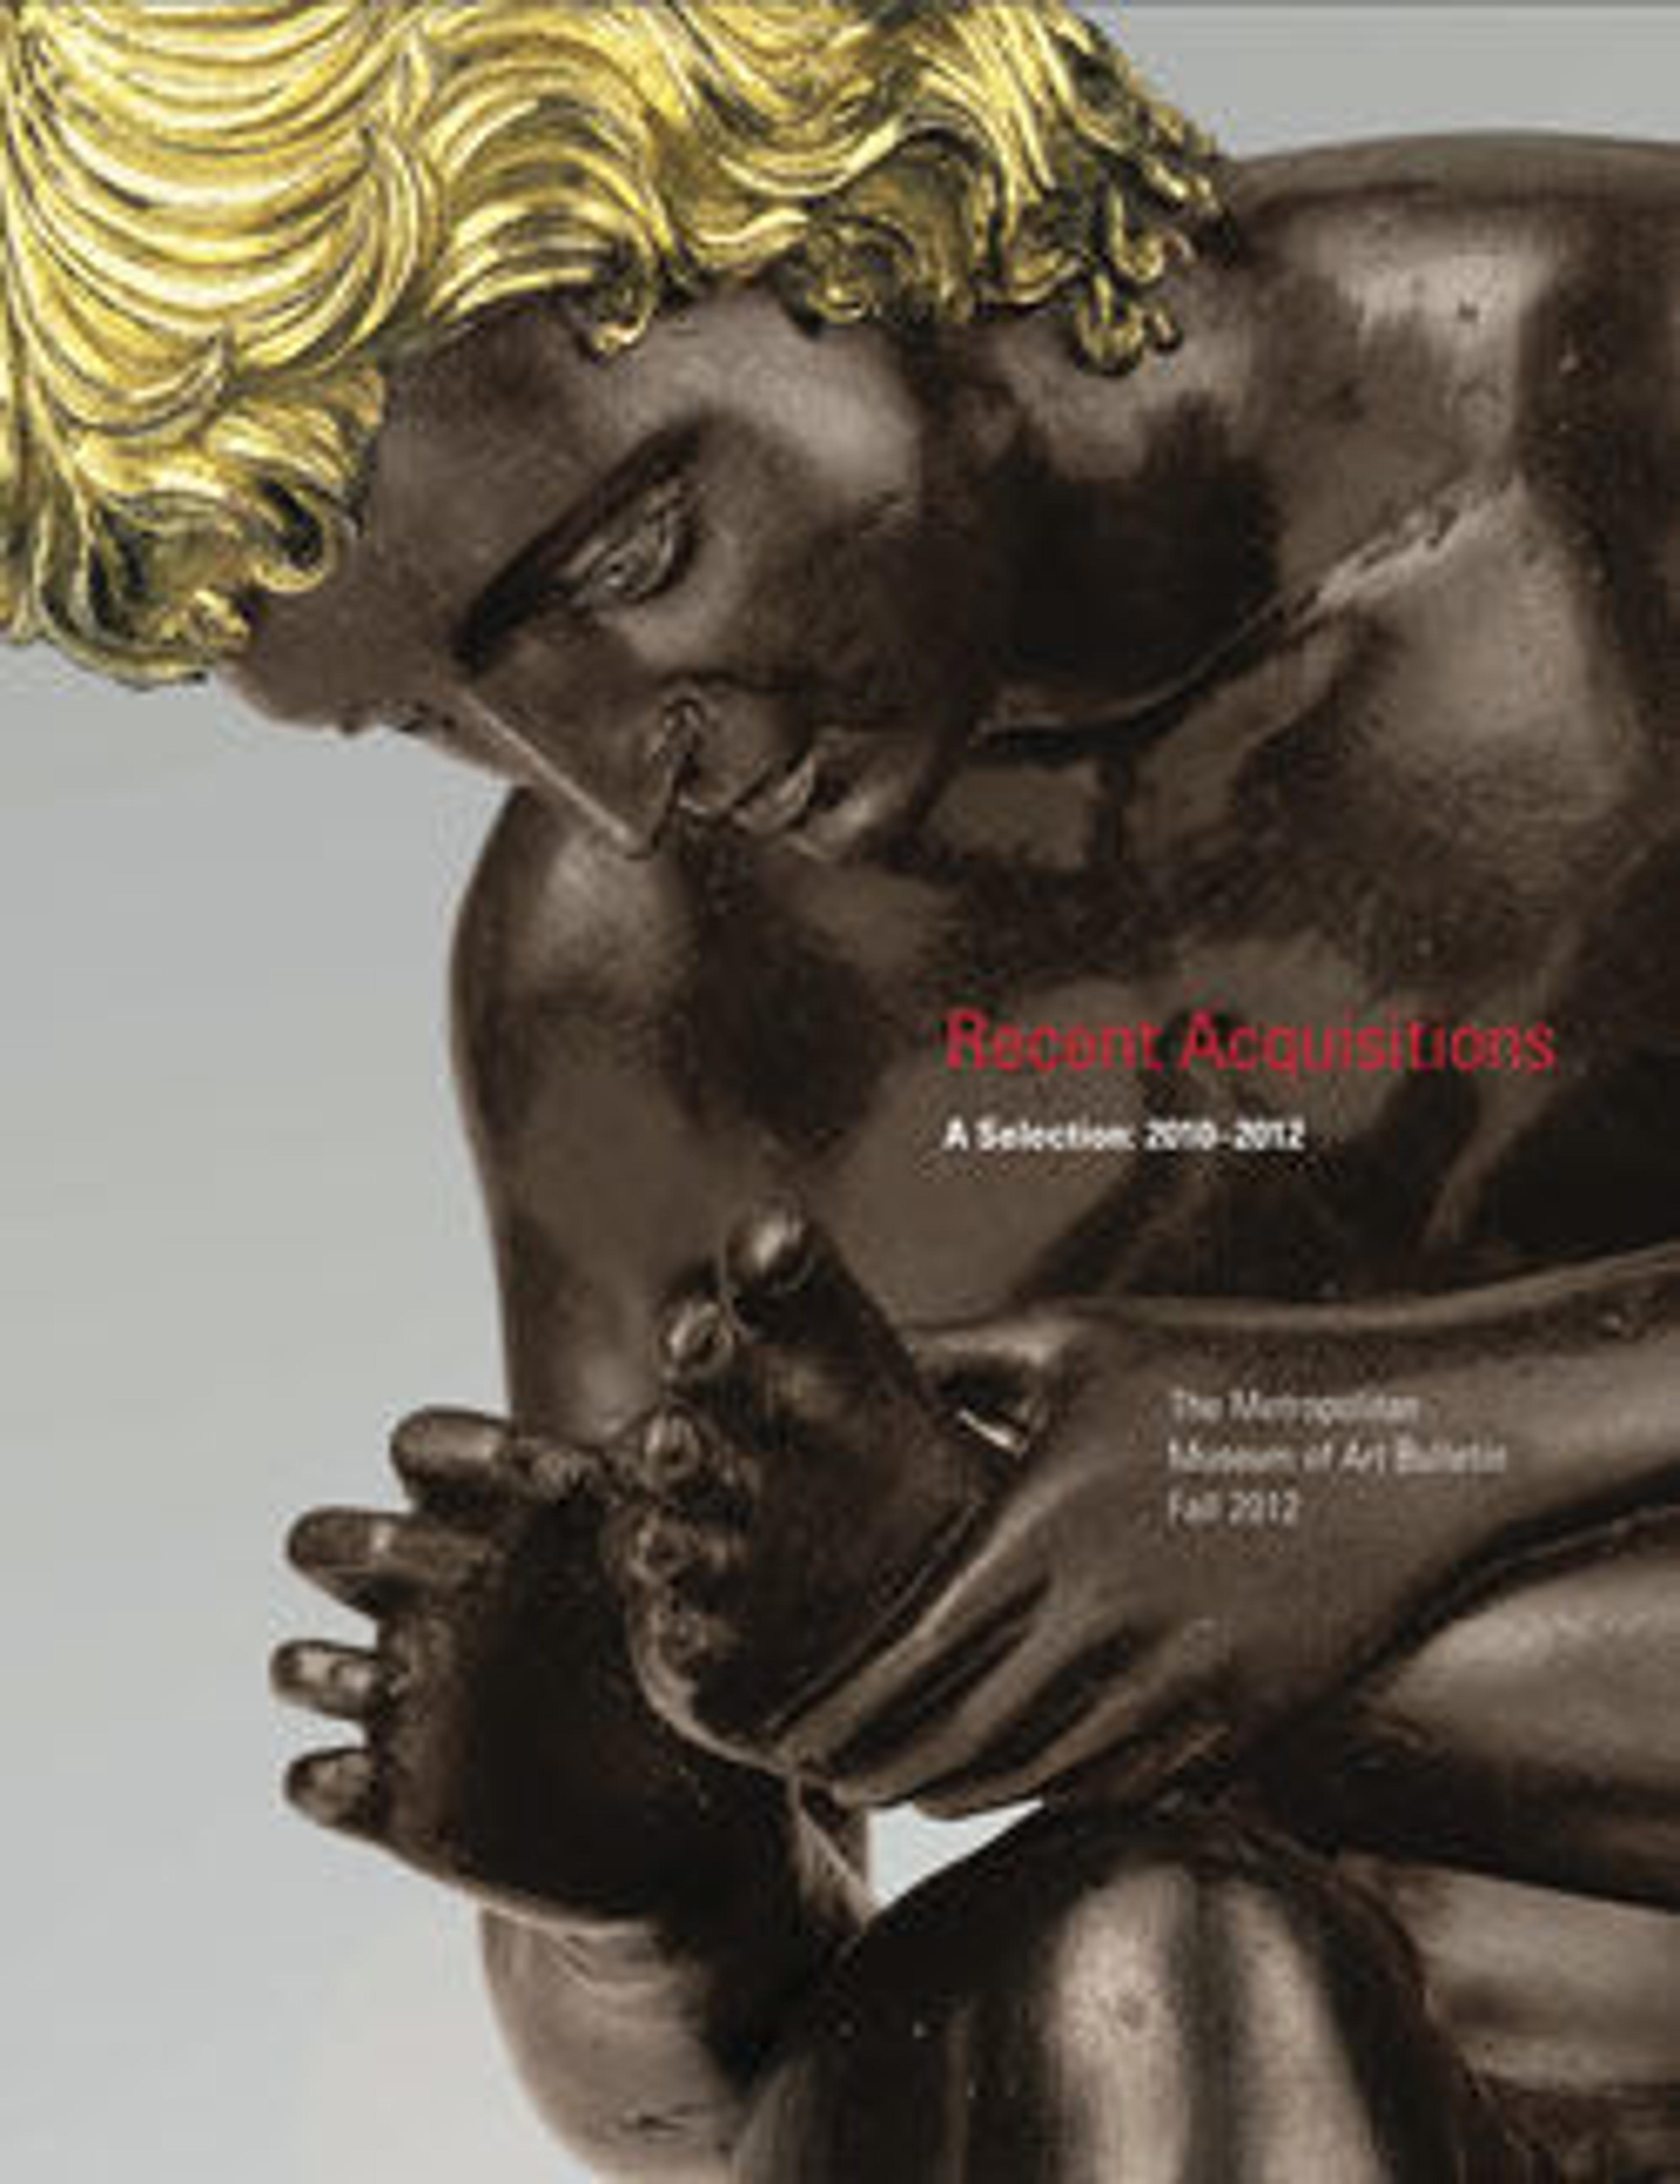 "Recent Acquisitions, A Selection: 2010-2012": The Metropolitan Museum of Art Bulletin, v. 70, no. 2 (Fall, 2012)